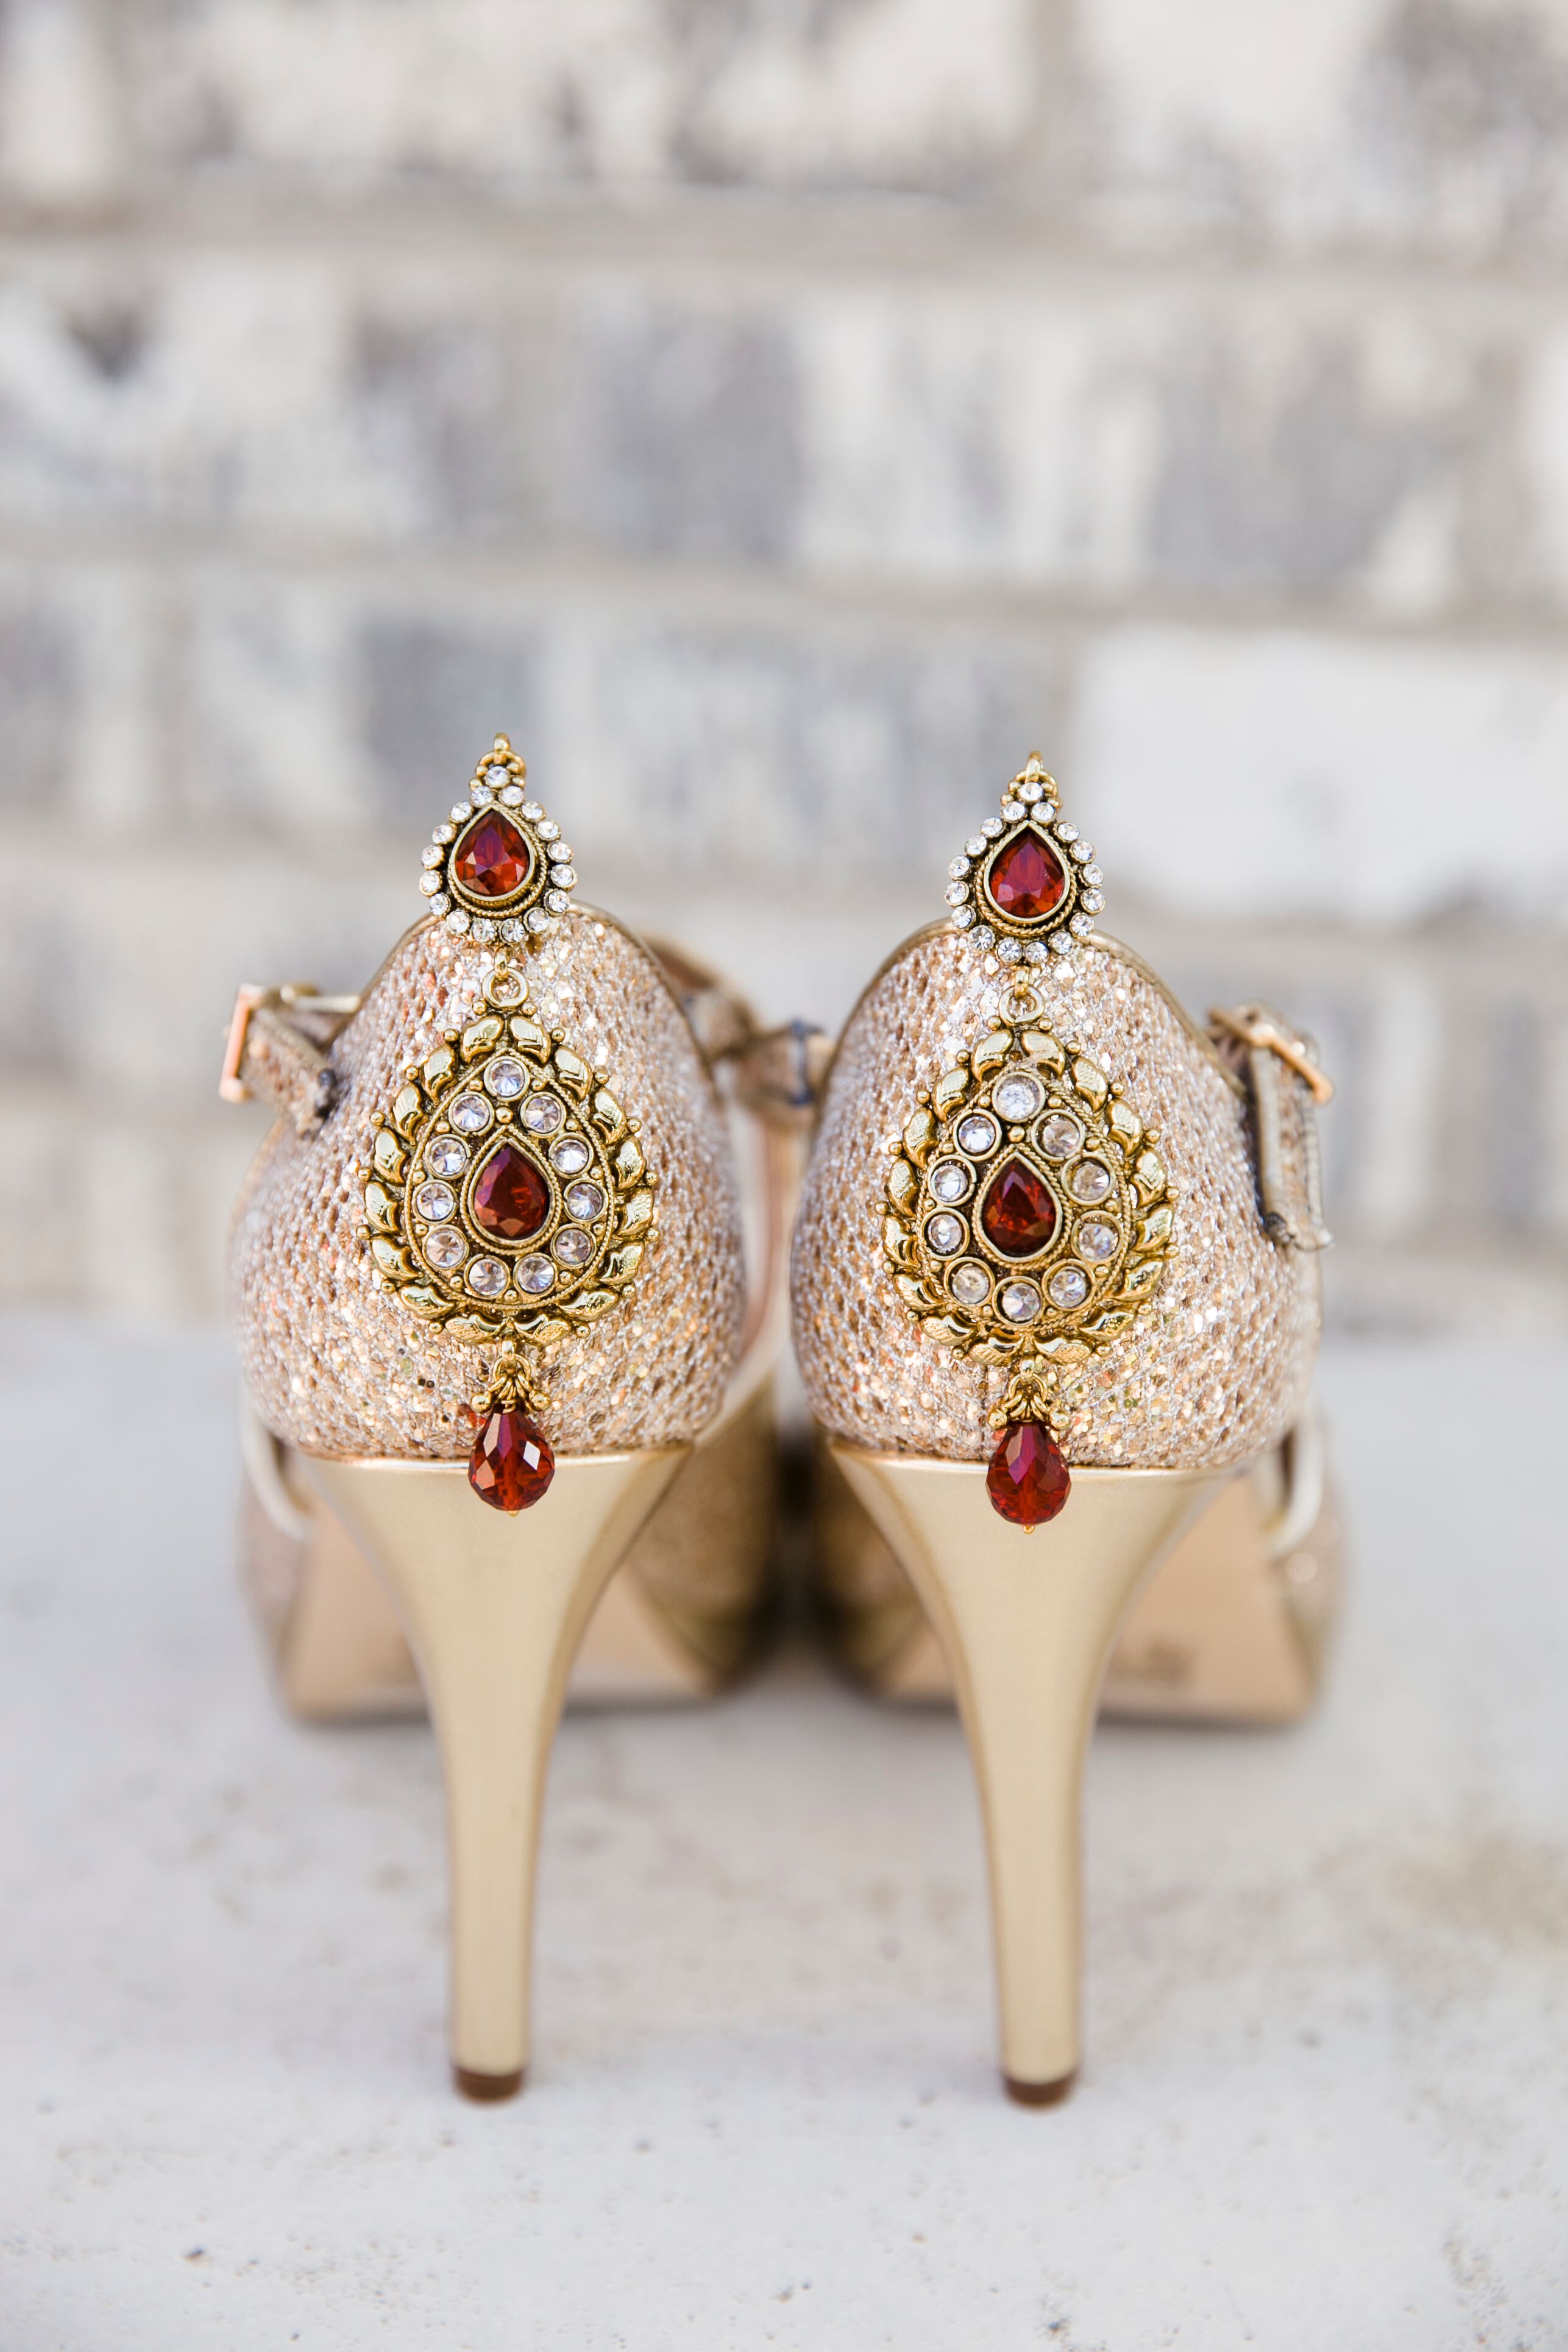 red and gold wedding shoes